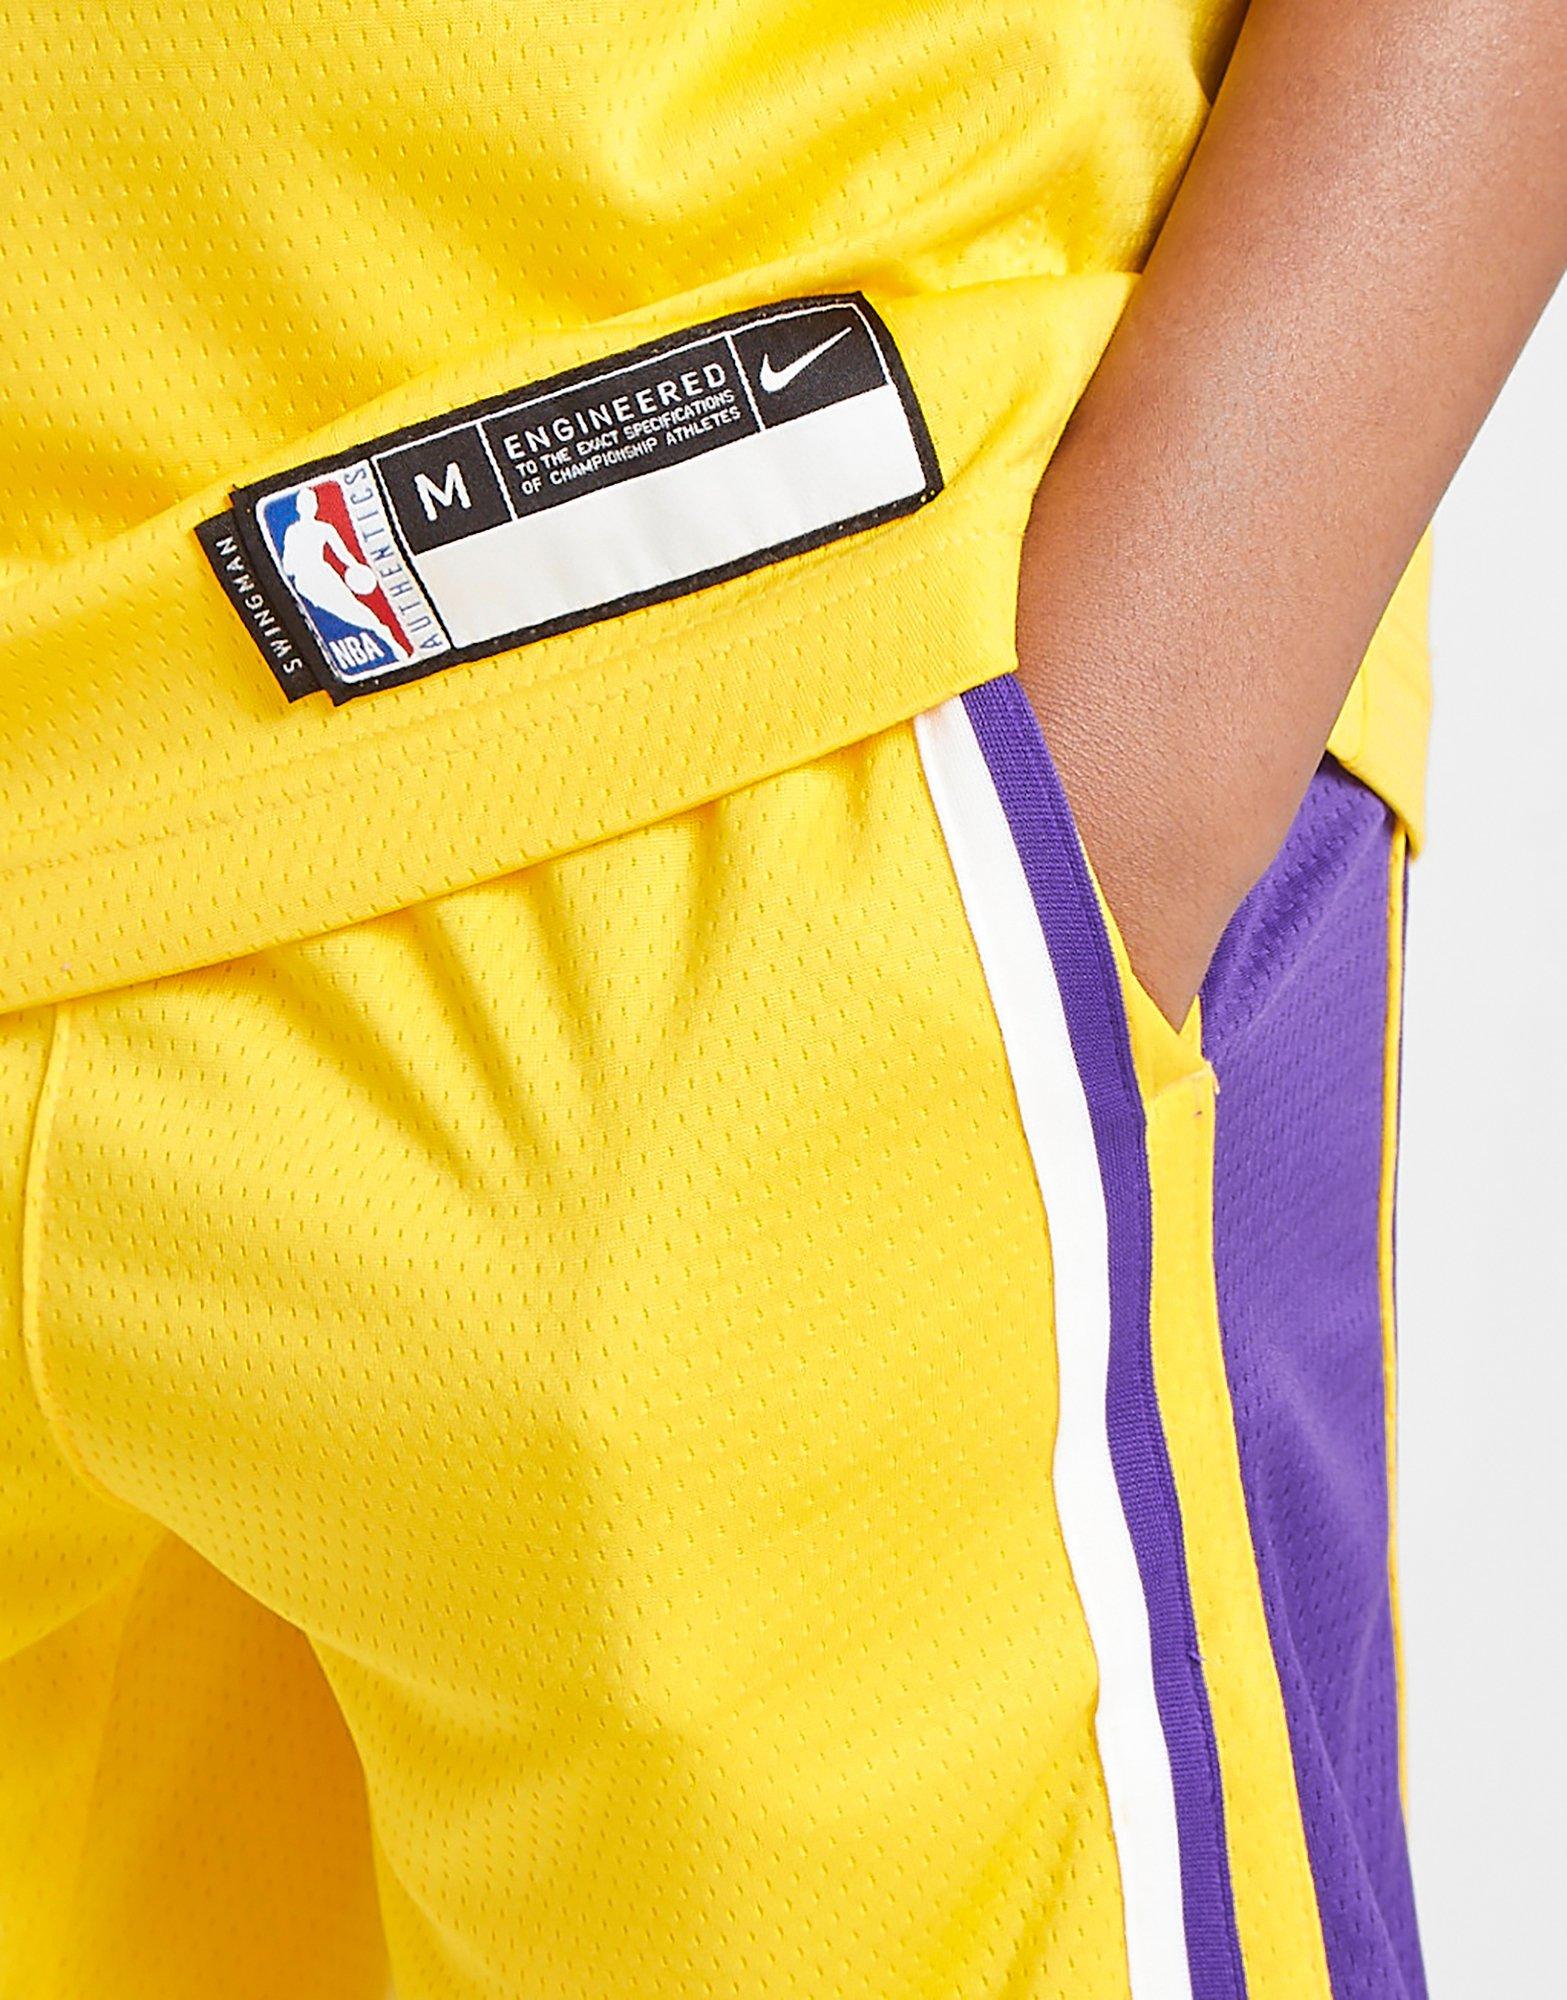 Lebron James Los Angeles Lakers Jersey yellow #23 – Classic Authentics